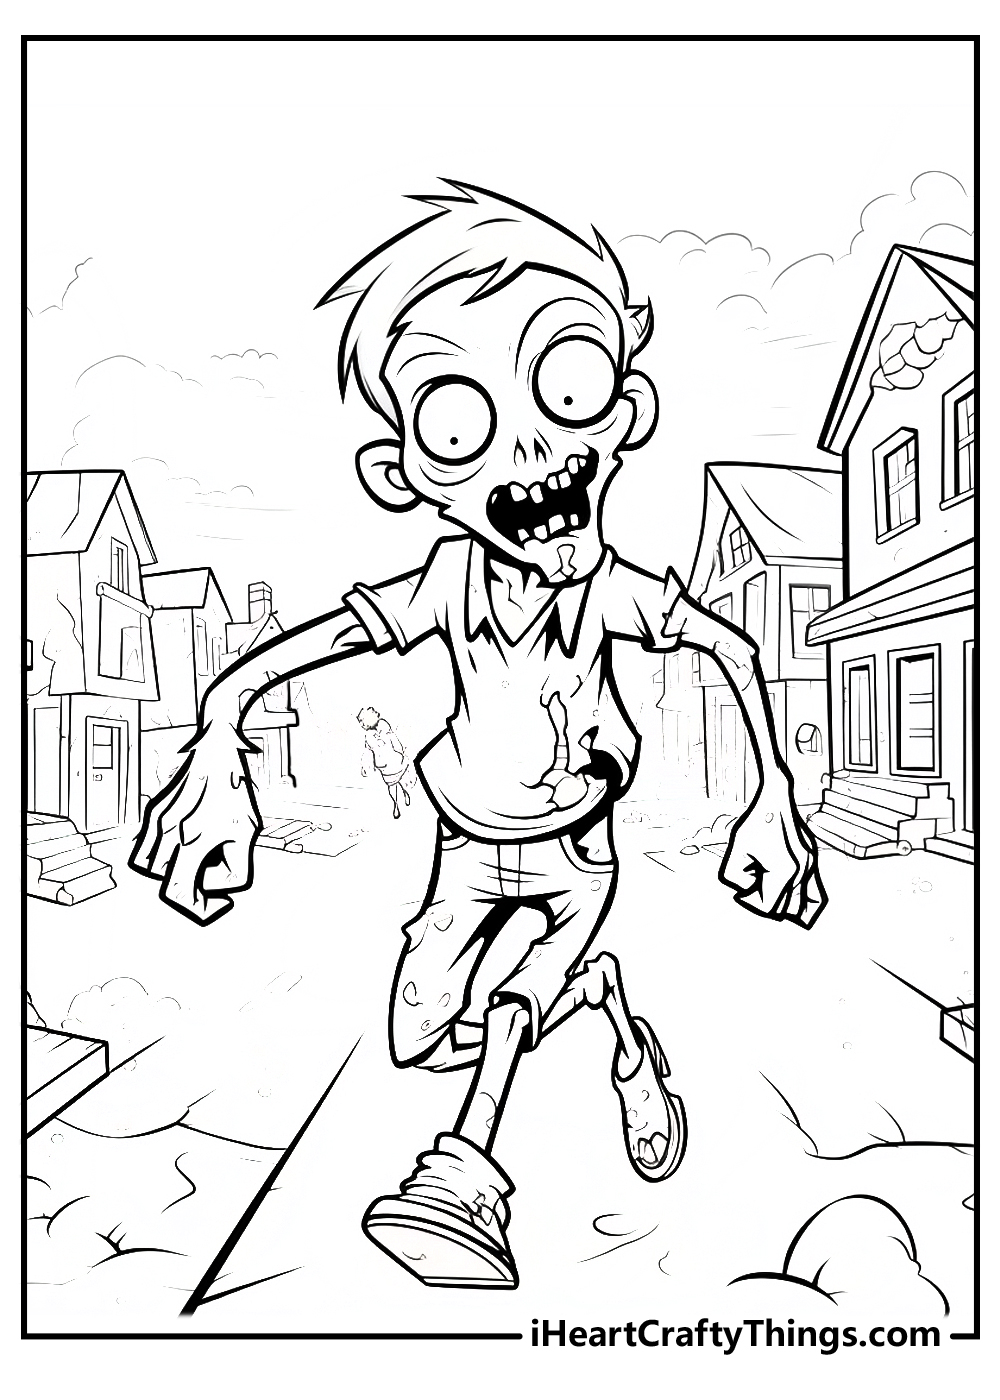 Zombie Rising Coloring Book For Kids: Large Image Zombies Coloring